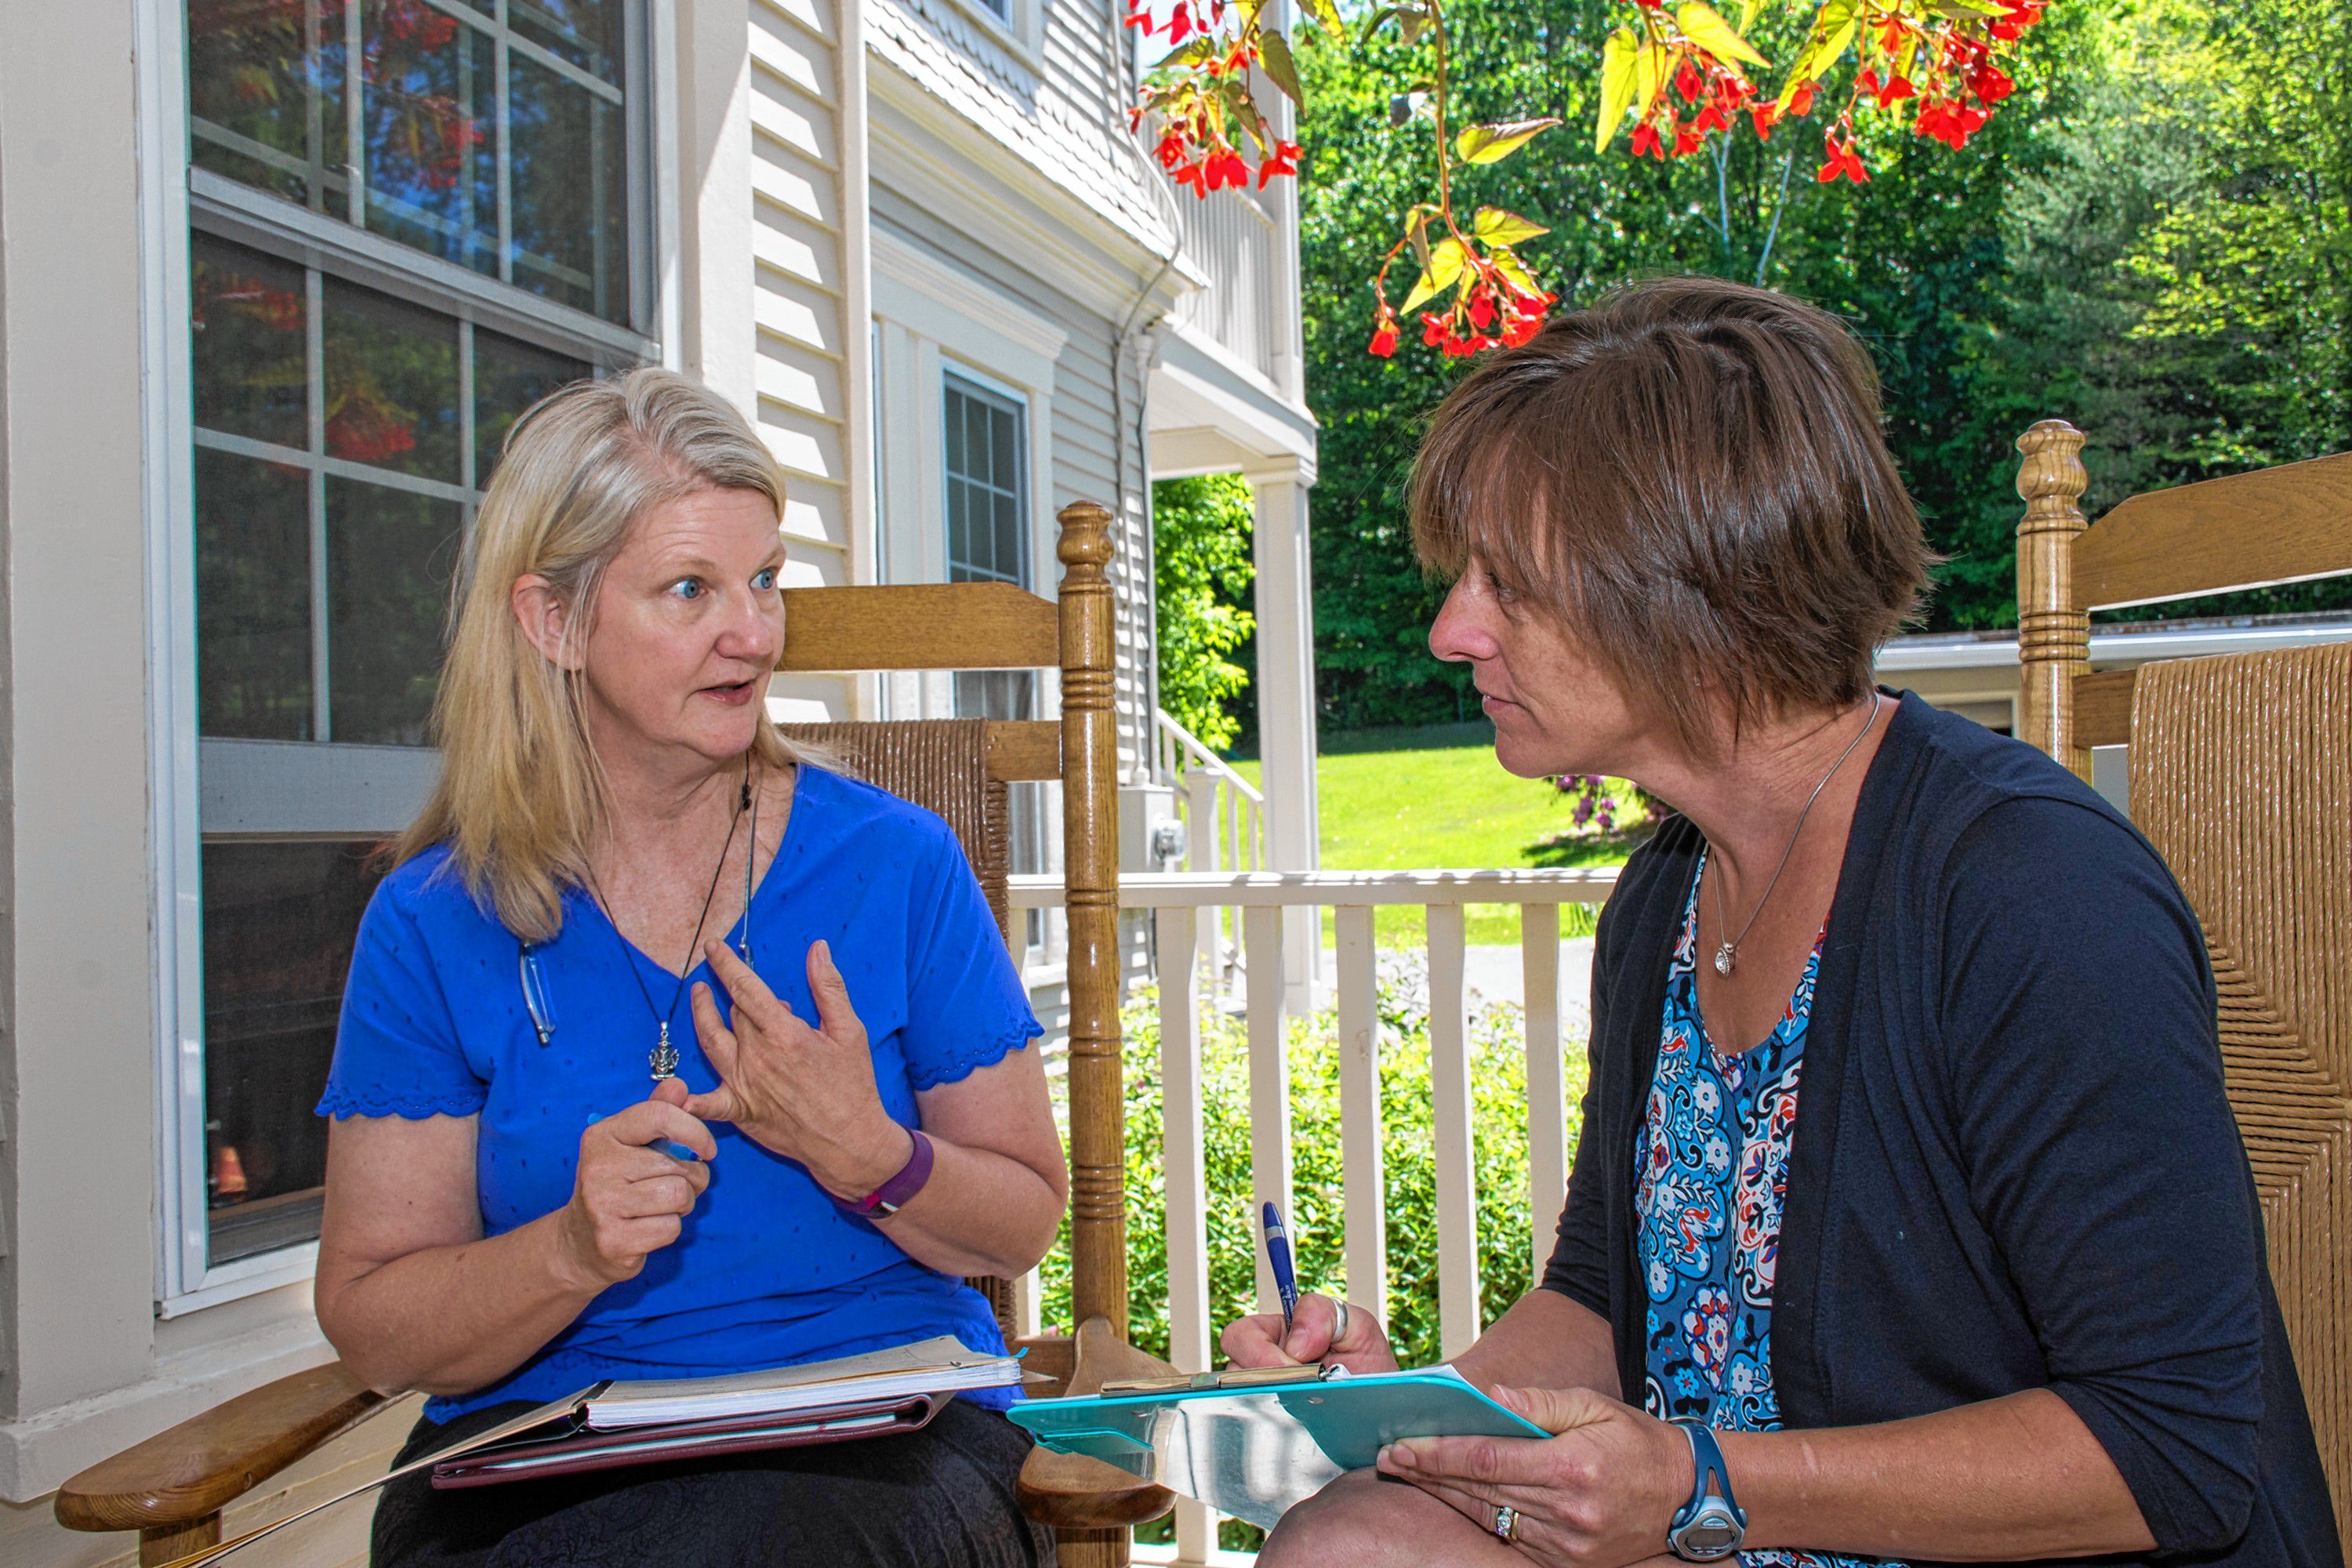 Eileen O'Connor, left, of West Lebanon, N.H., meets with Sarah Dole of Easy Peasy Organizing, right, to set goals and time frames for transitioning O'Connor's home and yard from winter to summer. Nancy Nutile-McMenemy photograph.